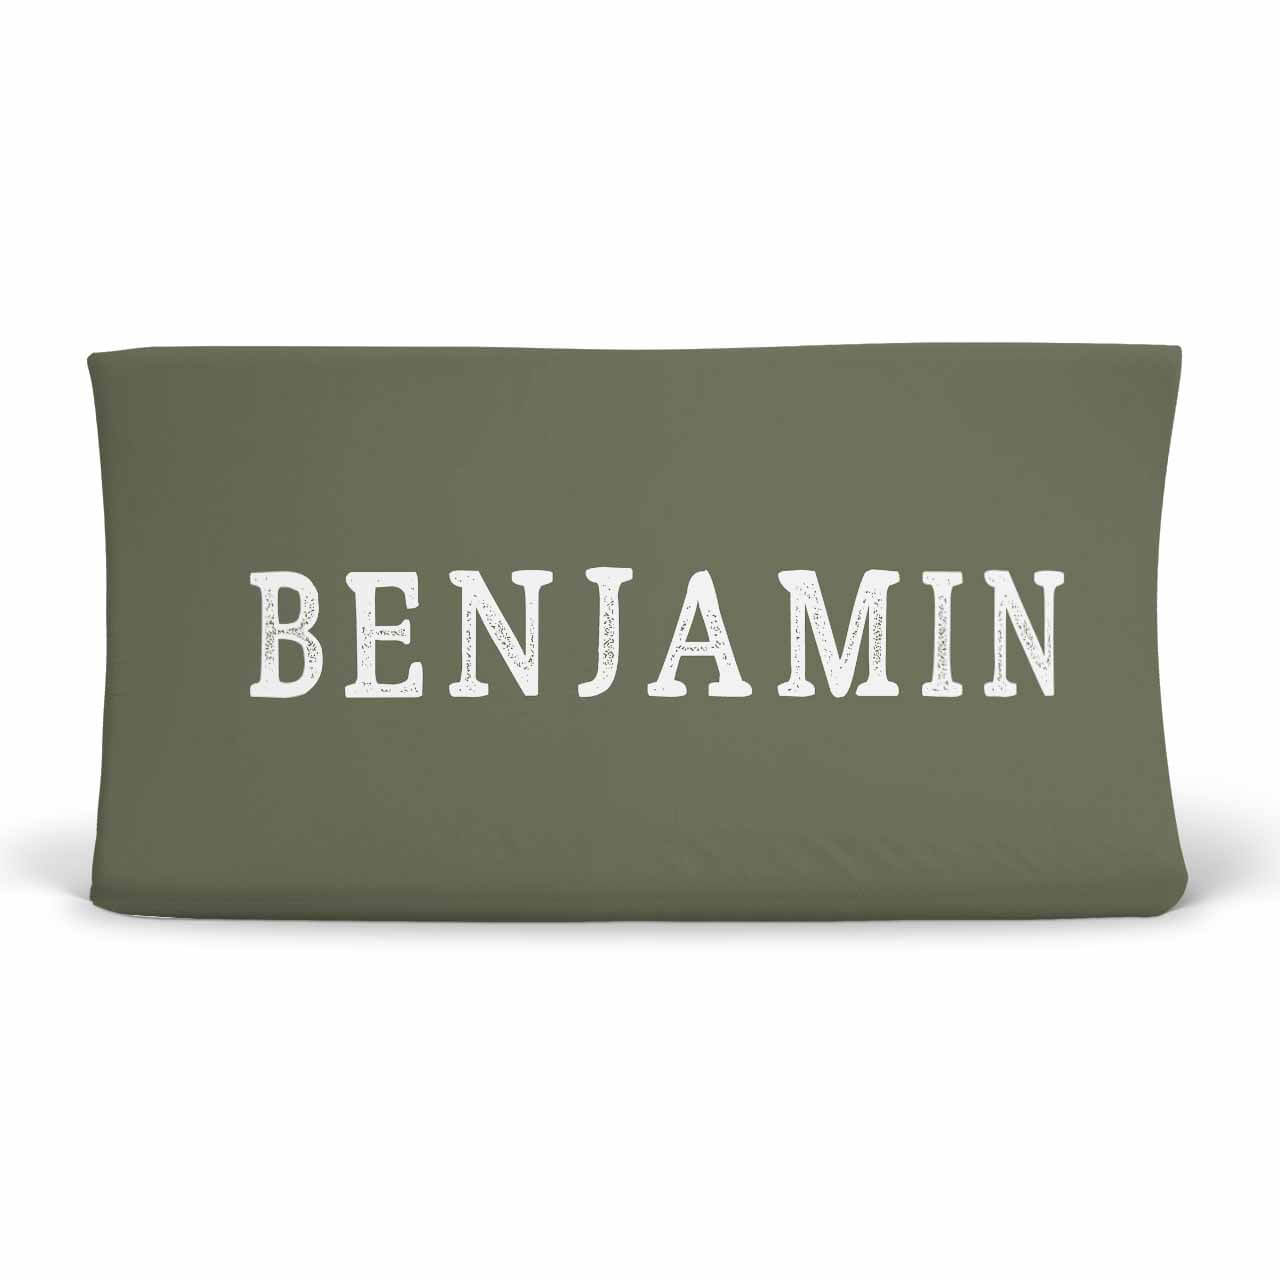 Personalized Olive Green Jersey Knit Changing Table Cover in Block Print